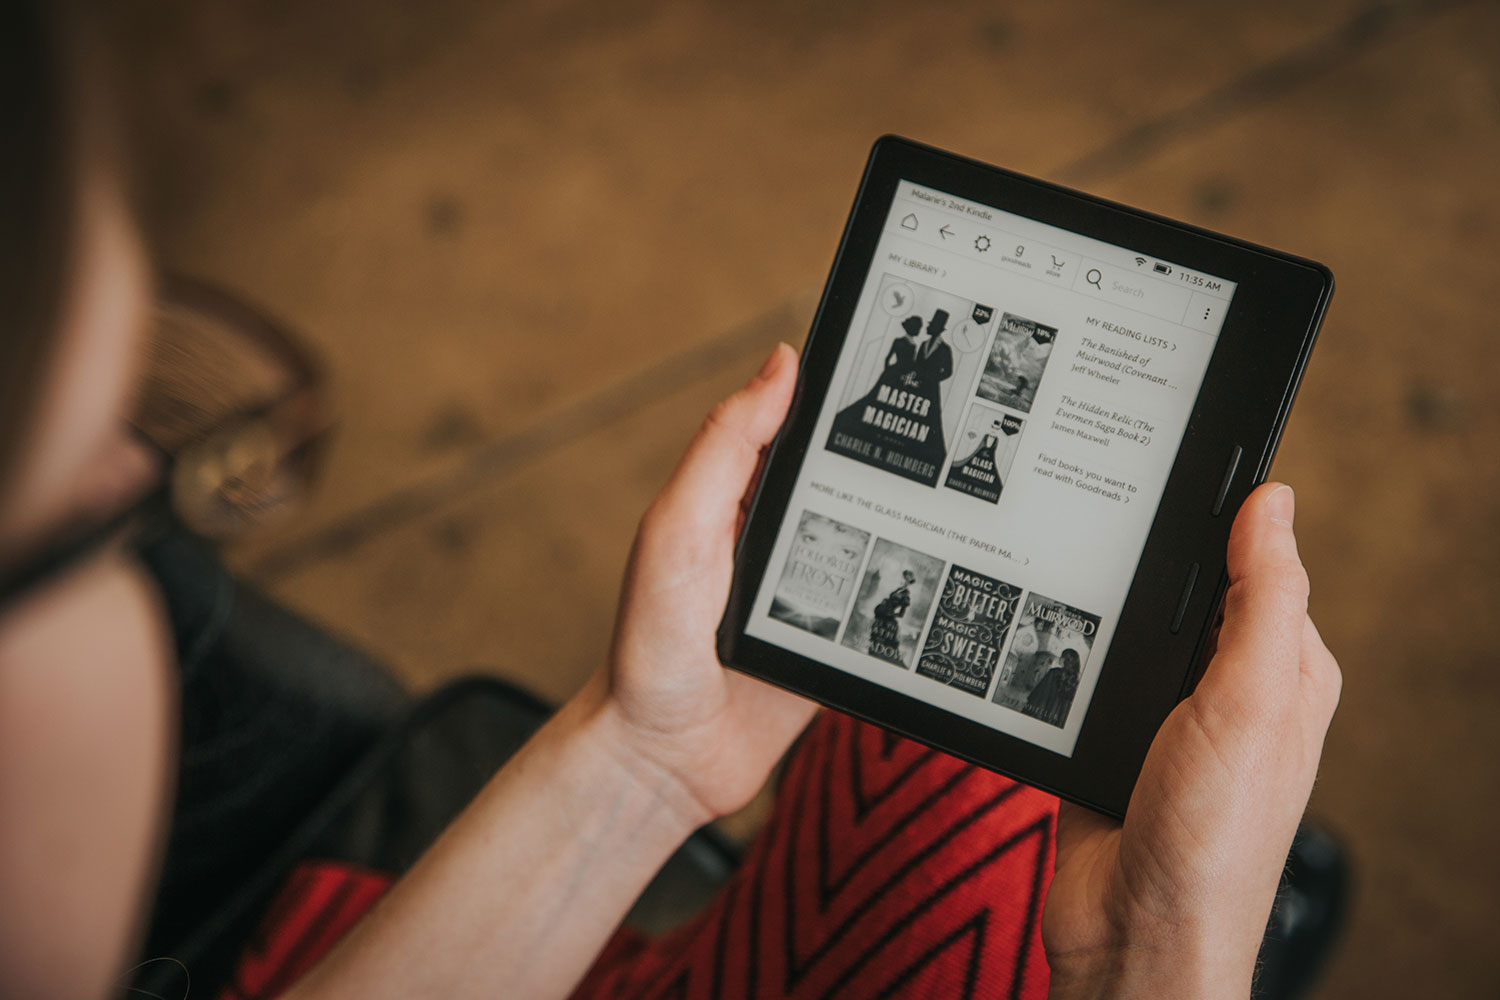 Kindle Oasis (2019) Review: A Paper-Like Reading Experience